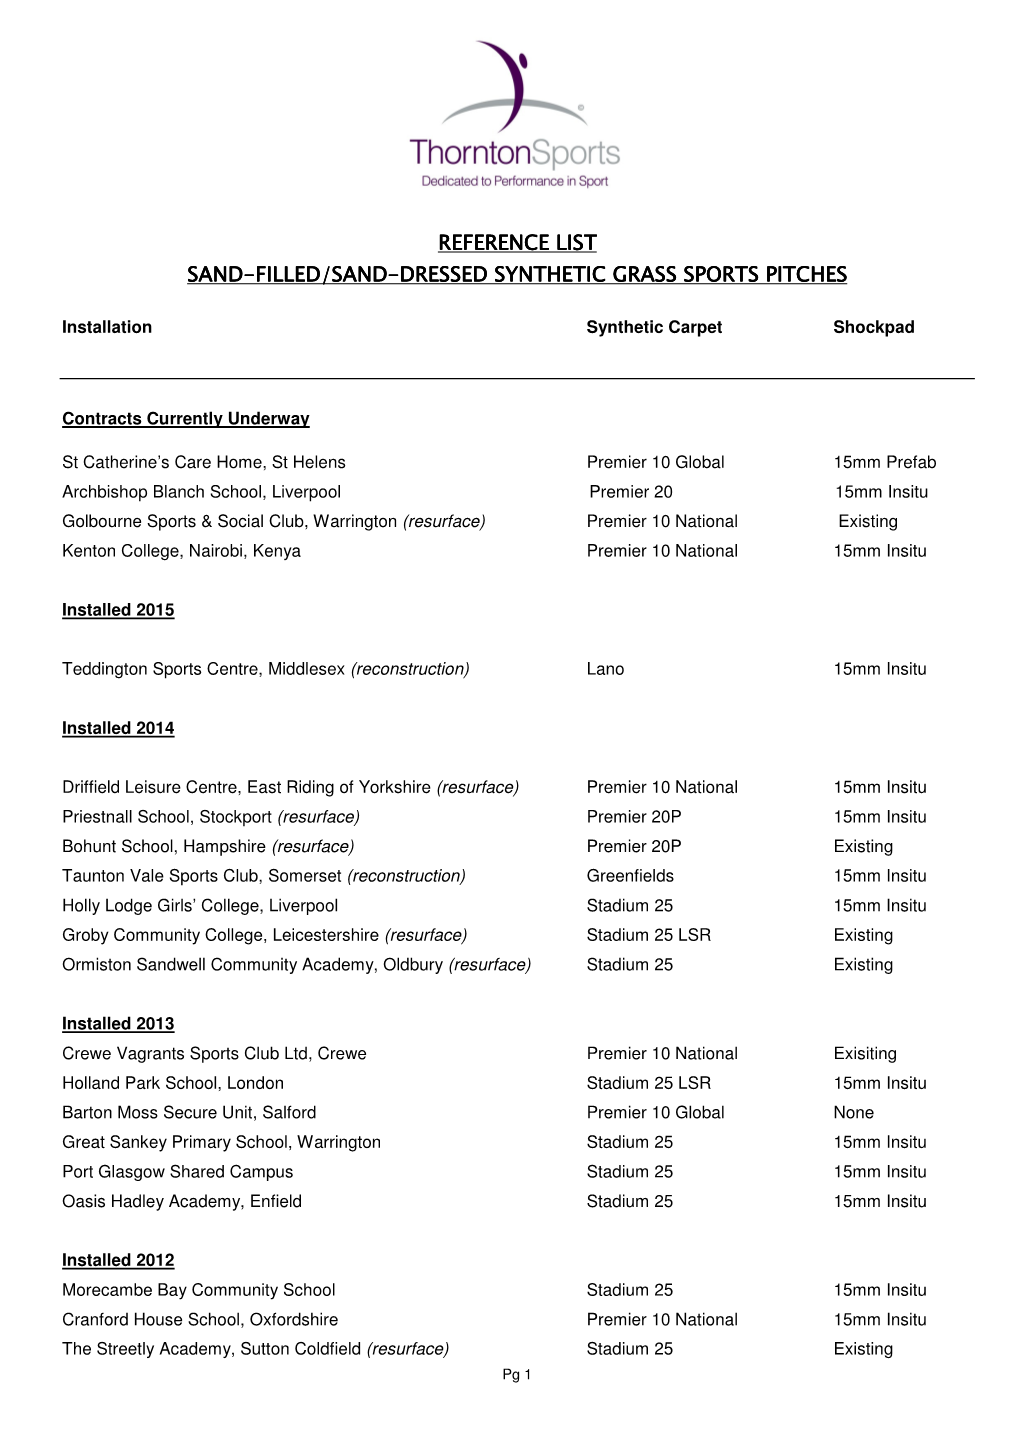 Synthetic Pitch Reference List 2015